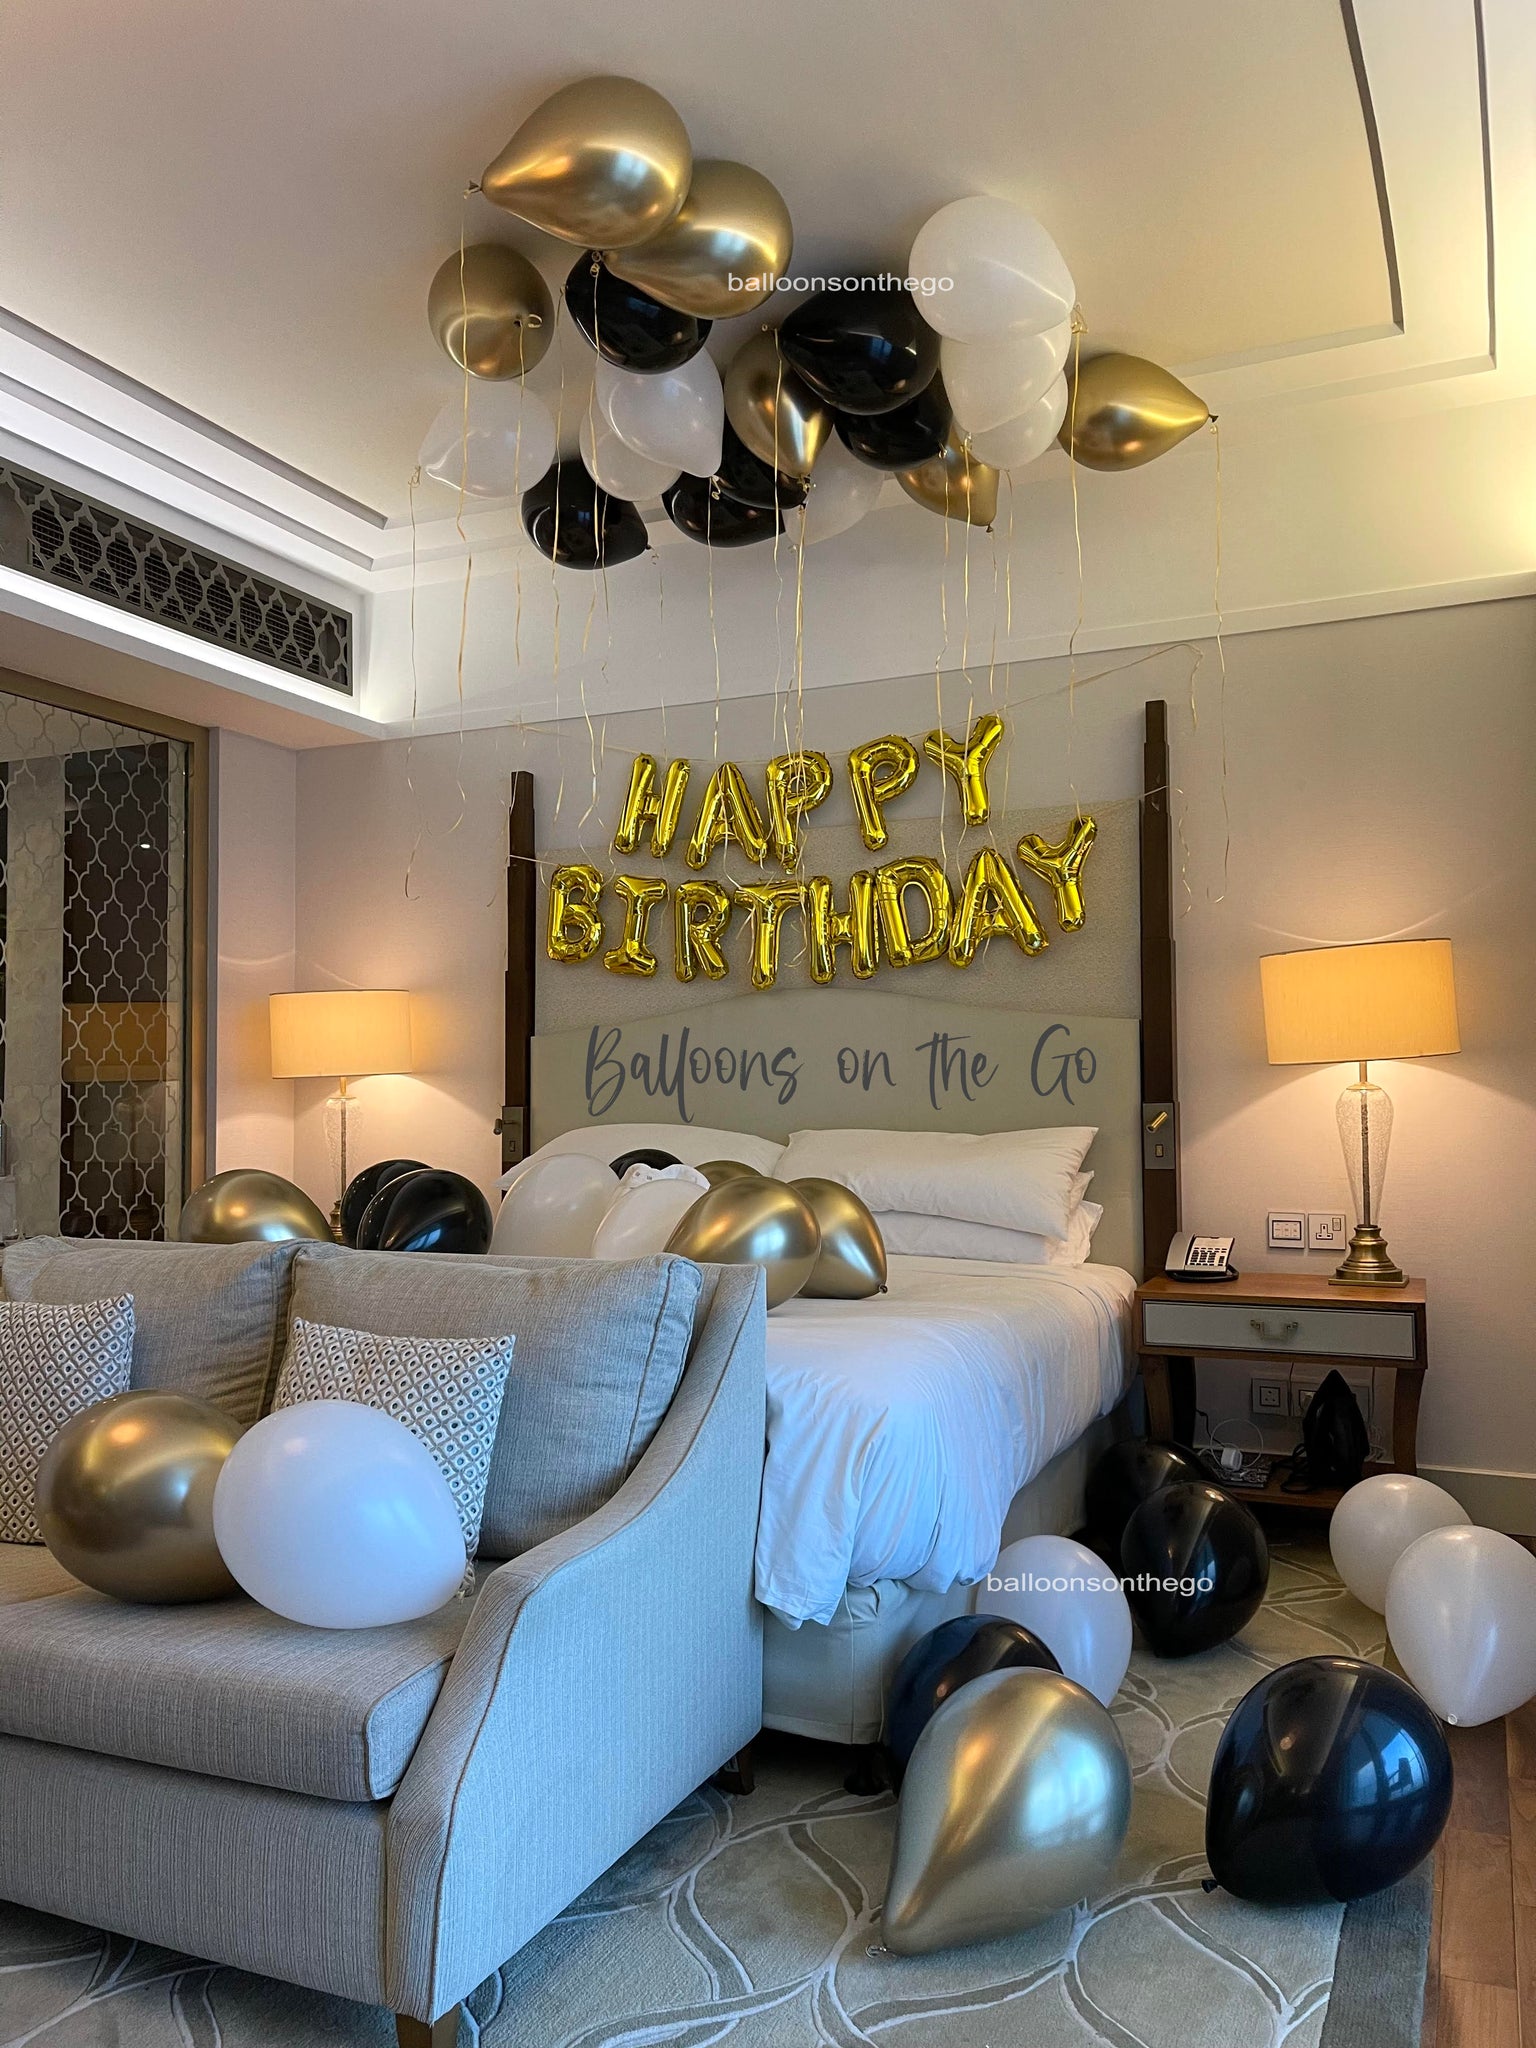 Small Balloon Setup in White, Black and Gold!